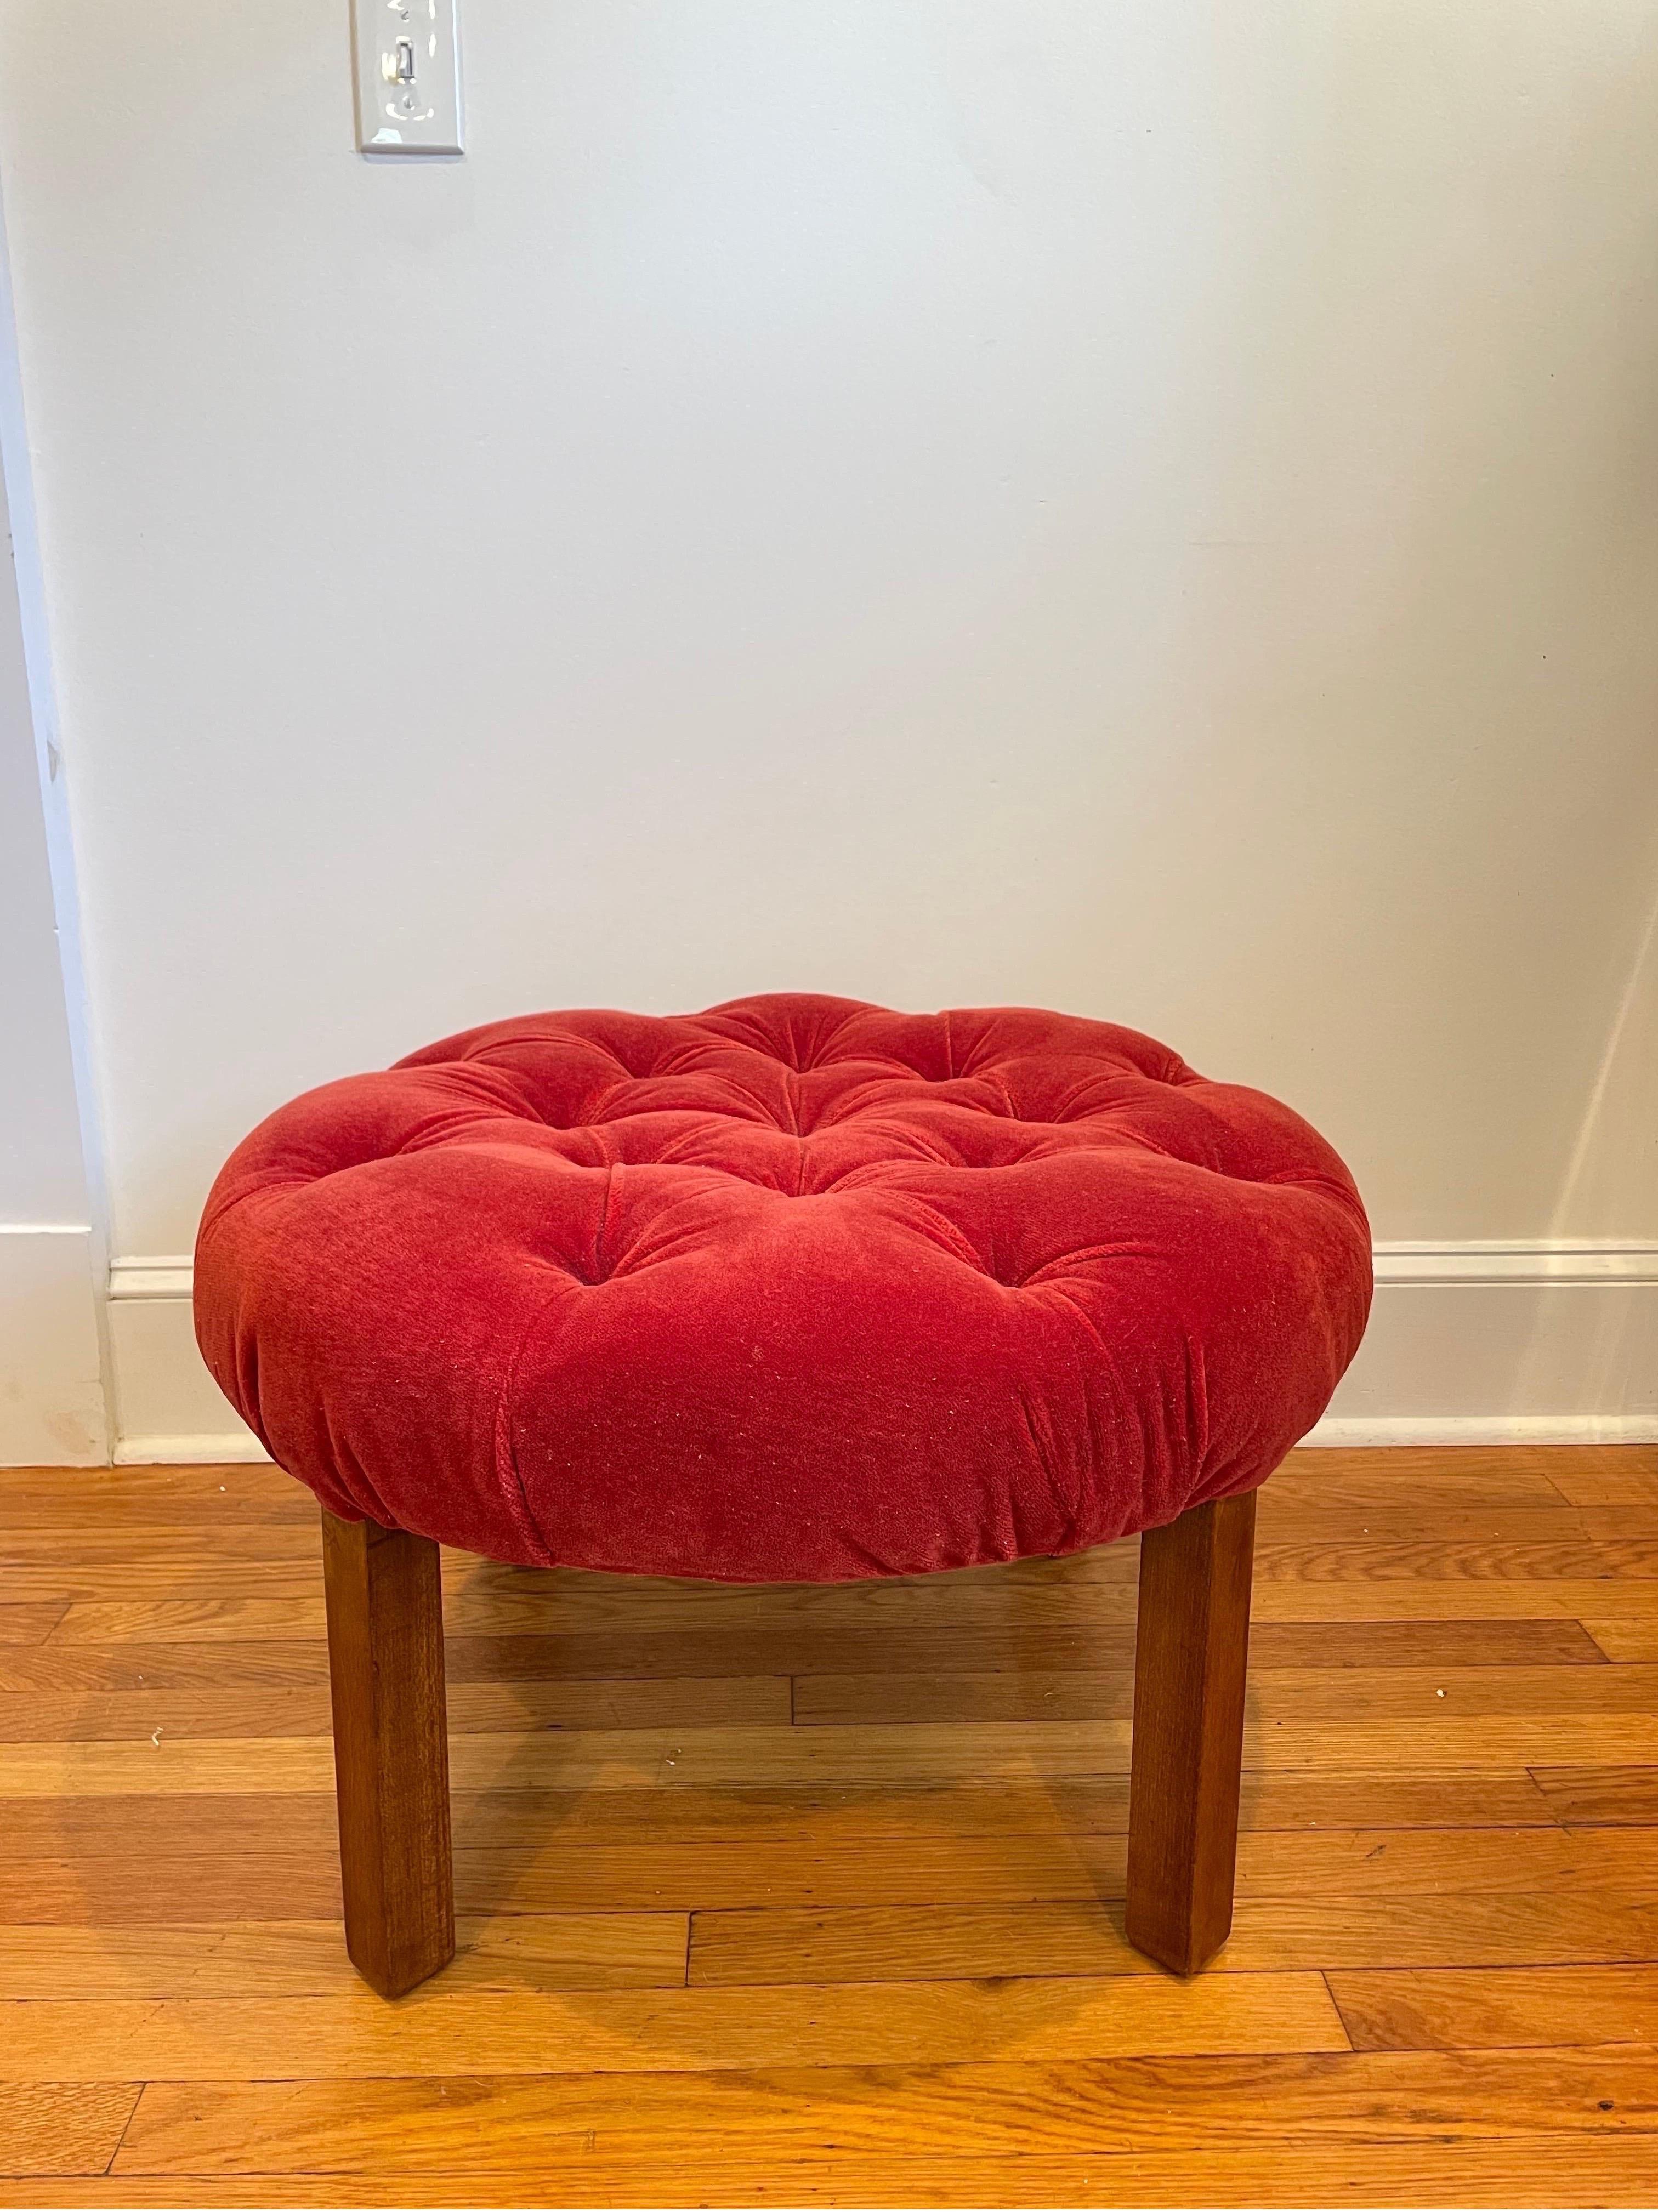 Timeless classic. Tufted mohair/velvet ottoman or tray table with square wooden legs. Dunbar Probber styling in its simplicity.